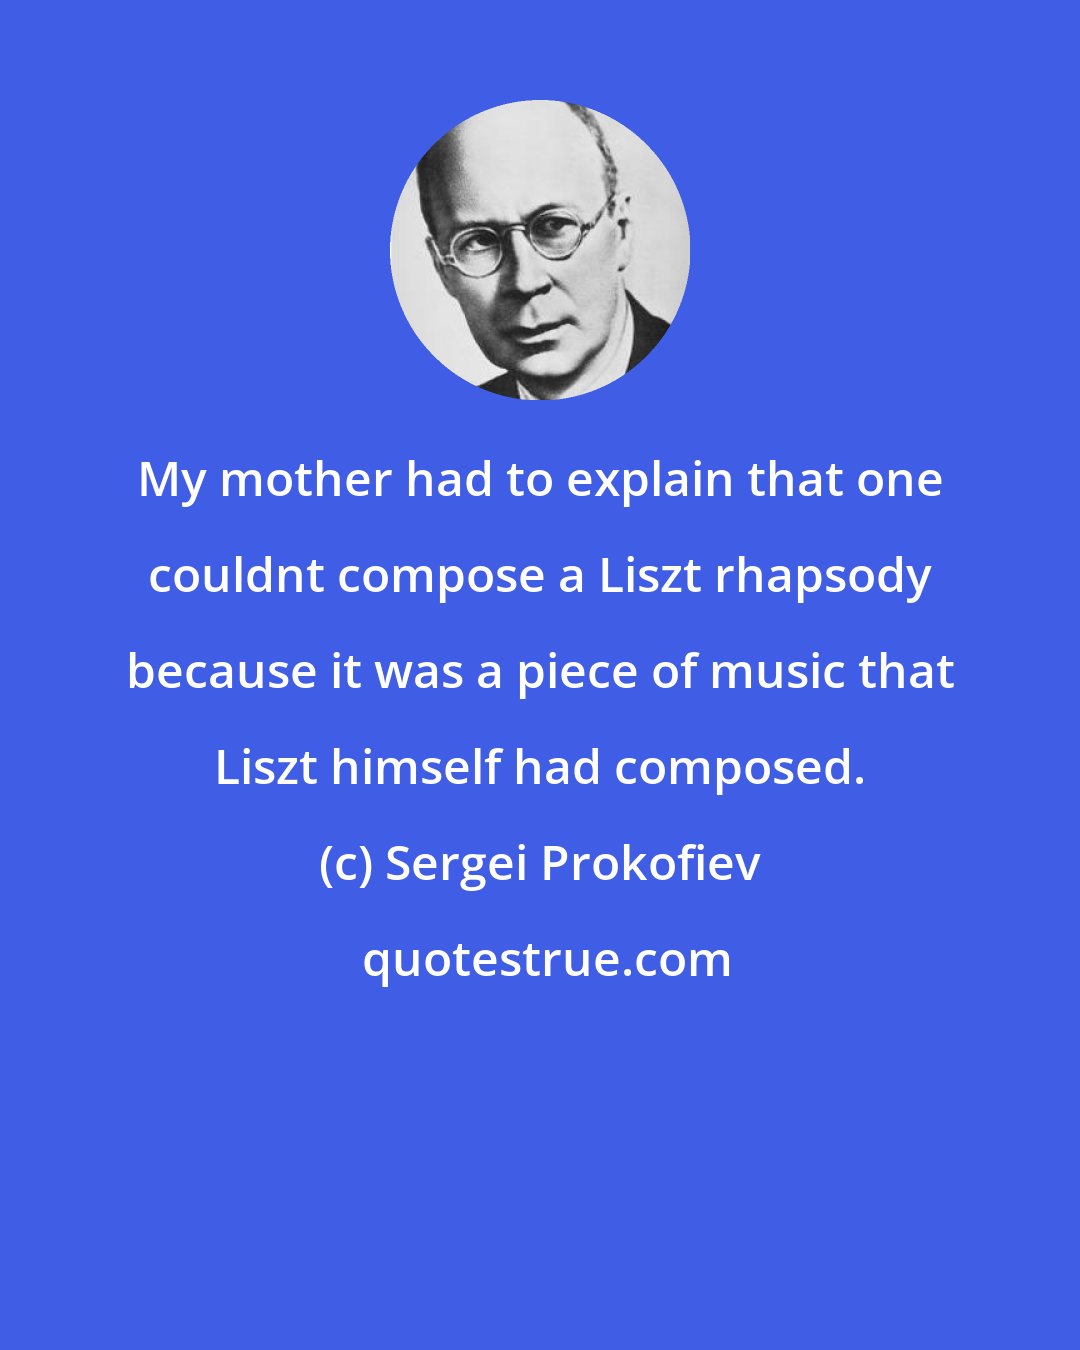 Sergei Prokofiev: My mother had to explain that one couldnt compose a Liszt rhapsody because it was a piece of music that Liszt himself had composed.